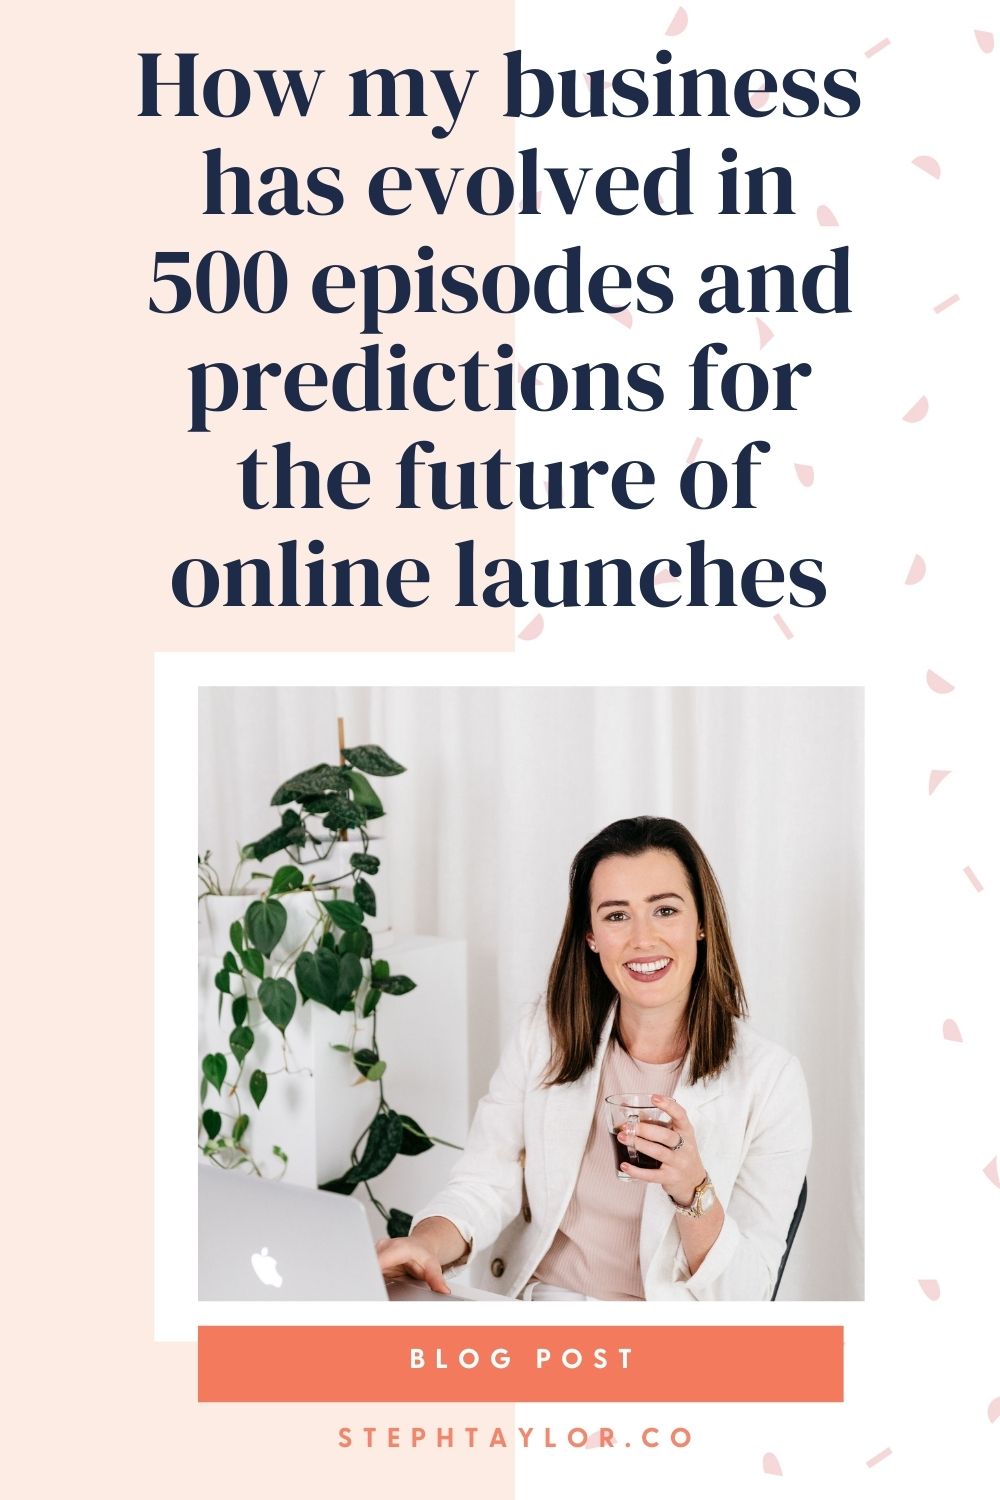 How my business has evolved in 500 episodes and predictions for the future of online launches